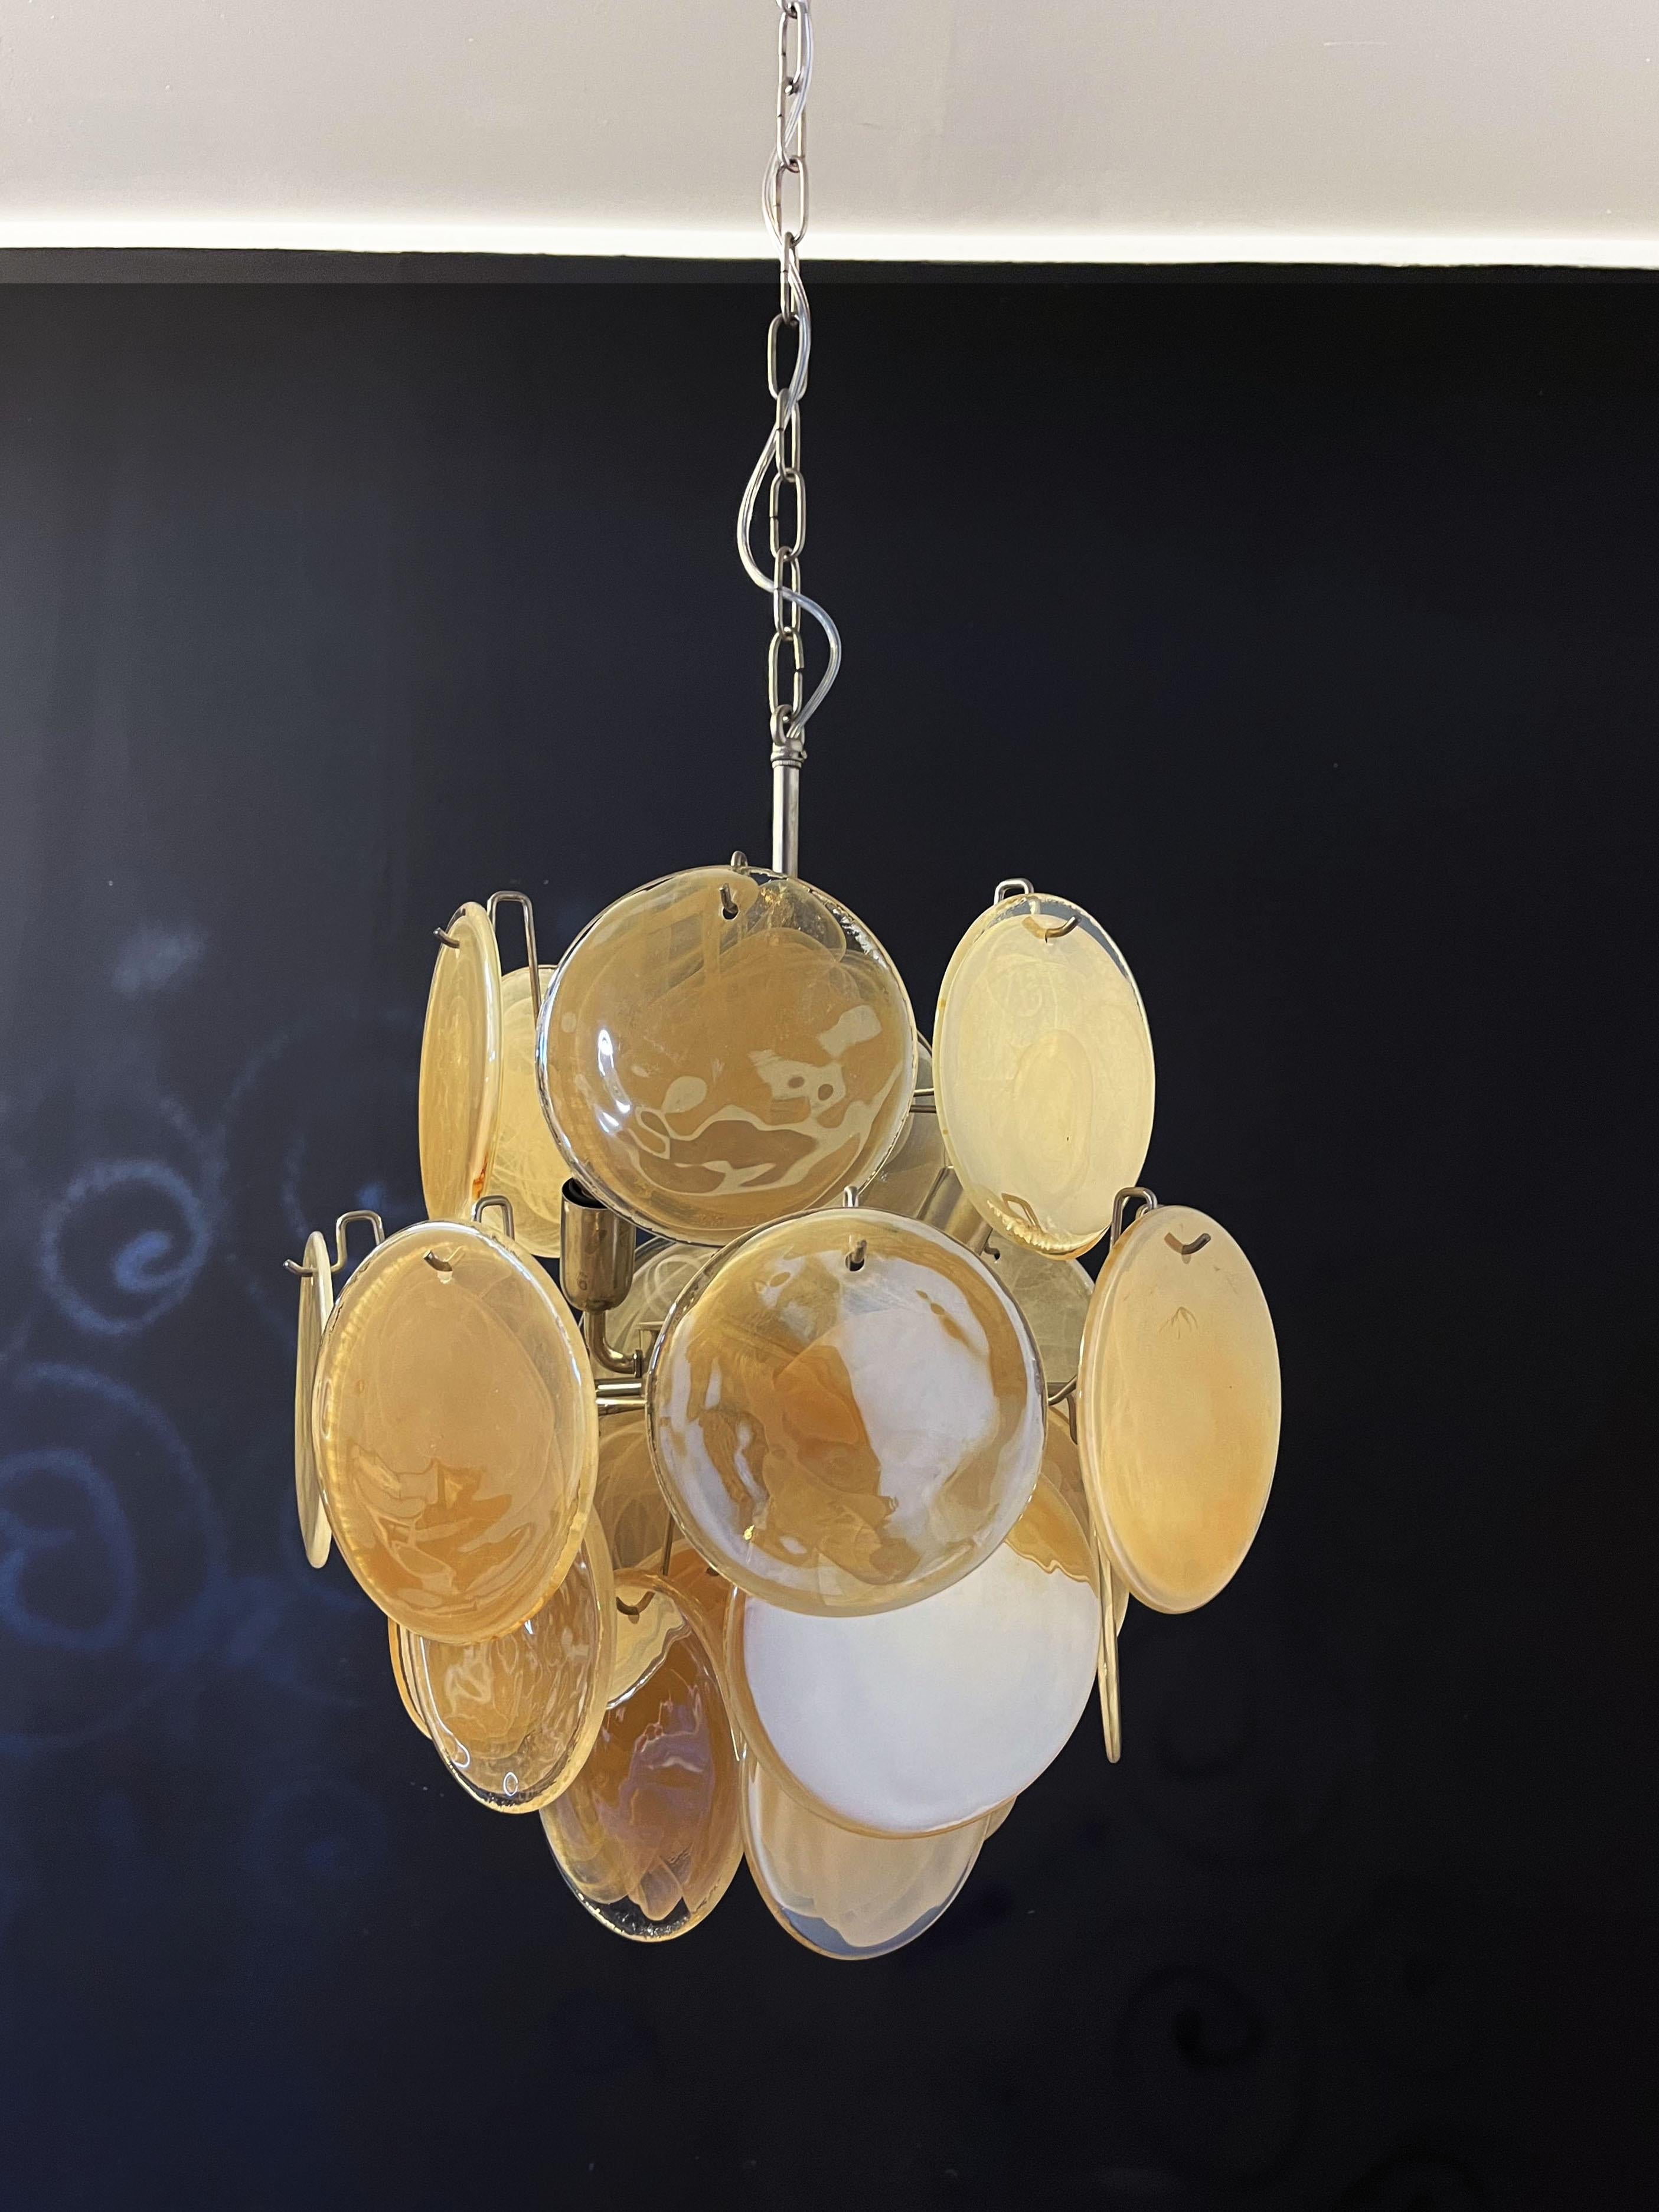 Vintage Italian Murano chandelier in Vistosi style. The chandelier has 24 fantastic iridescent alabaster honey discs in a nickel metal frame.
Period: late 20th century
Dimensions: 41,30 inches (105 cm) height with chain; 20,50 inches (52 cm)